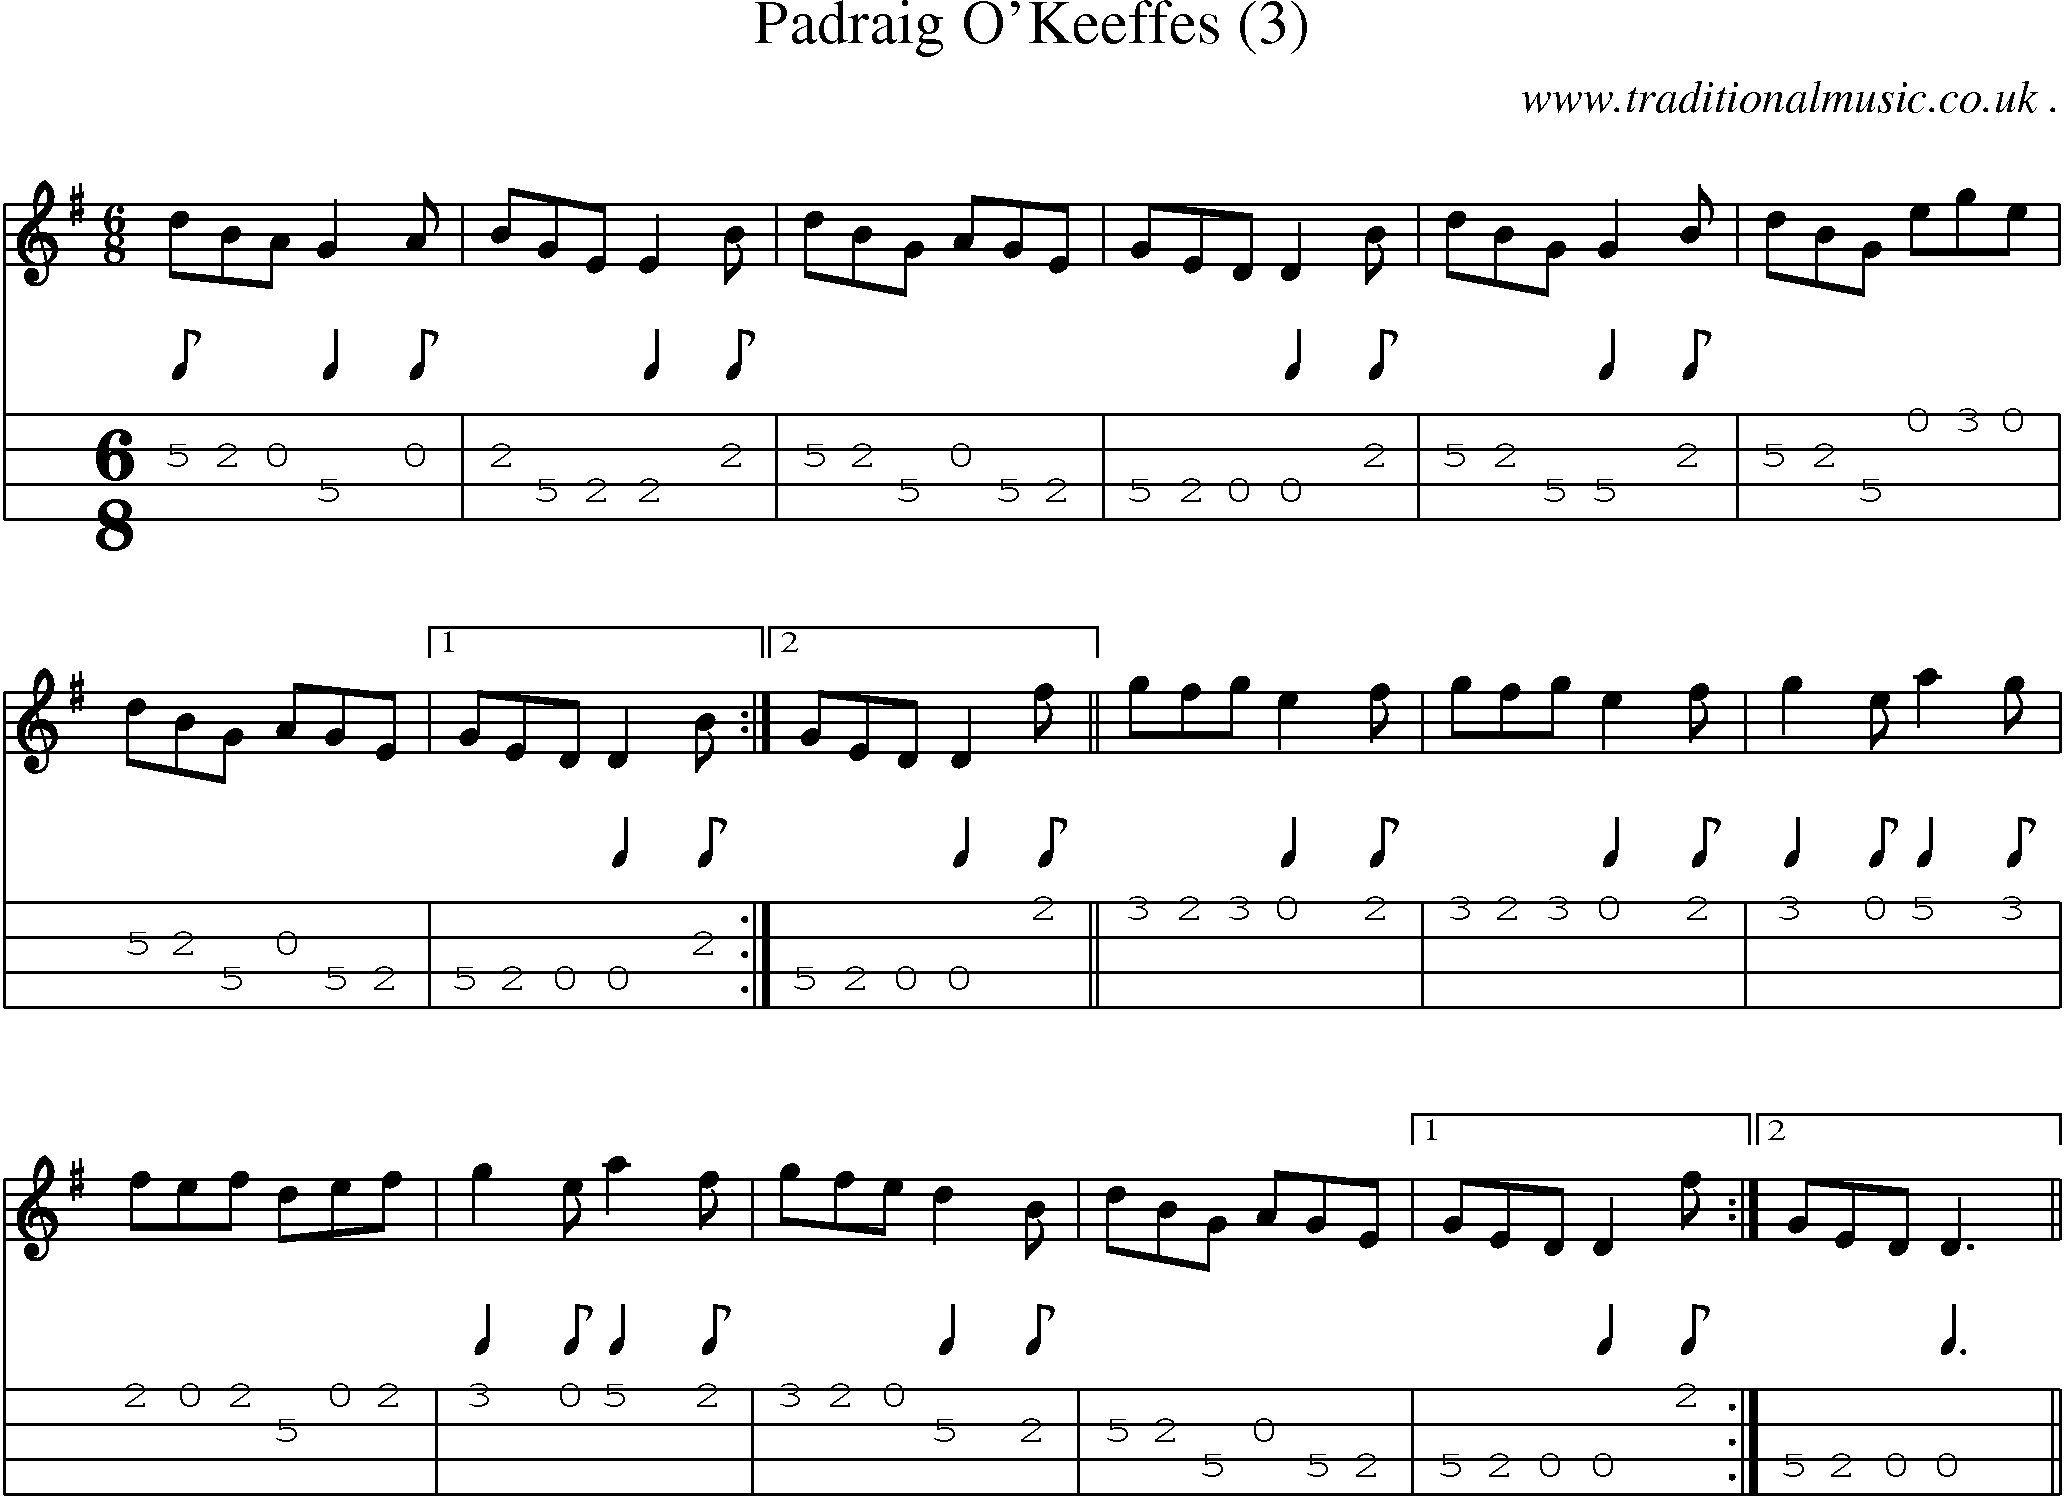 Sheet-Music and Mandolin Tabs for Padraig Okeeffes (3)